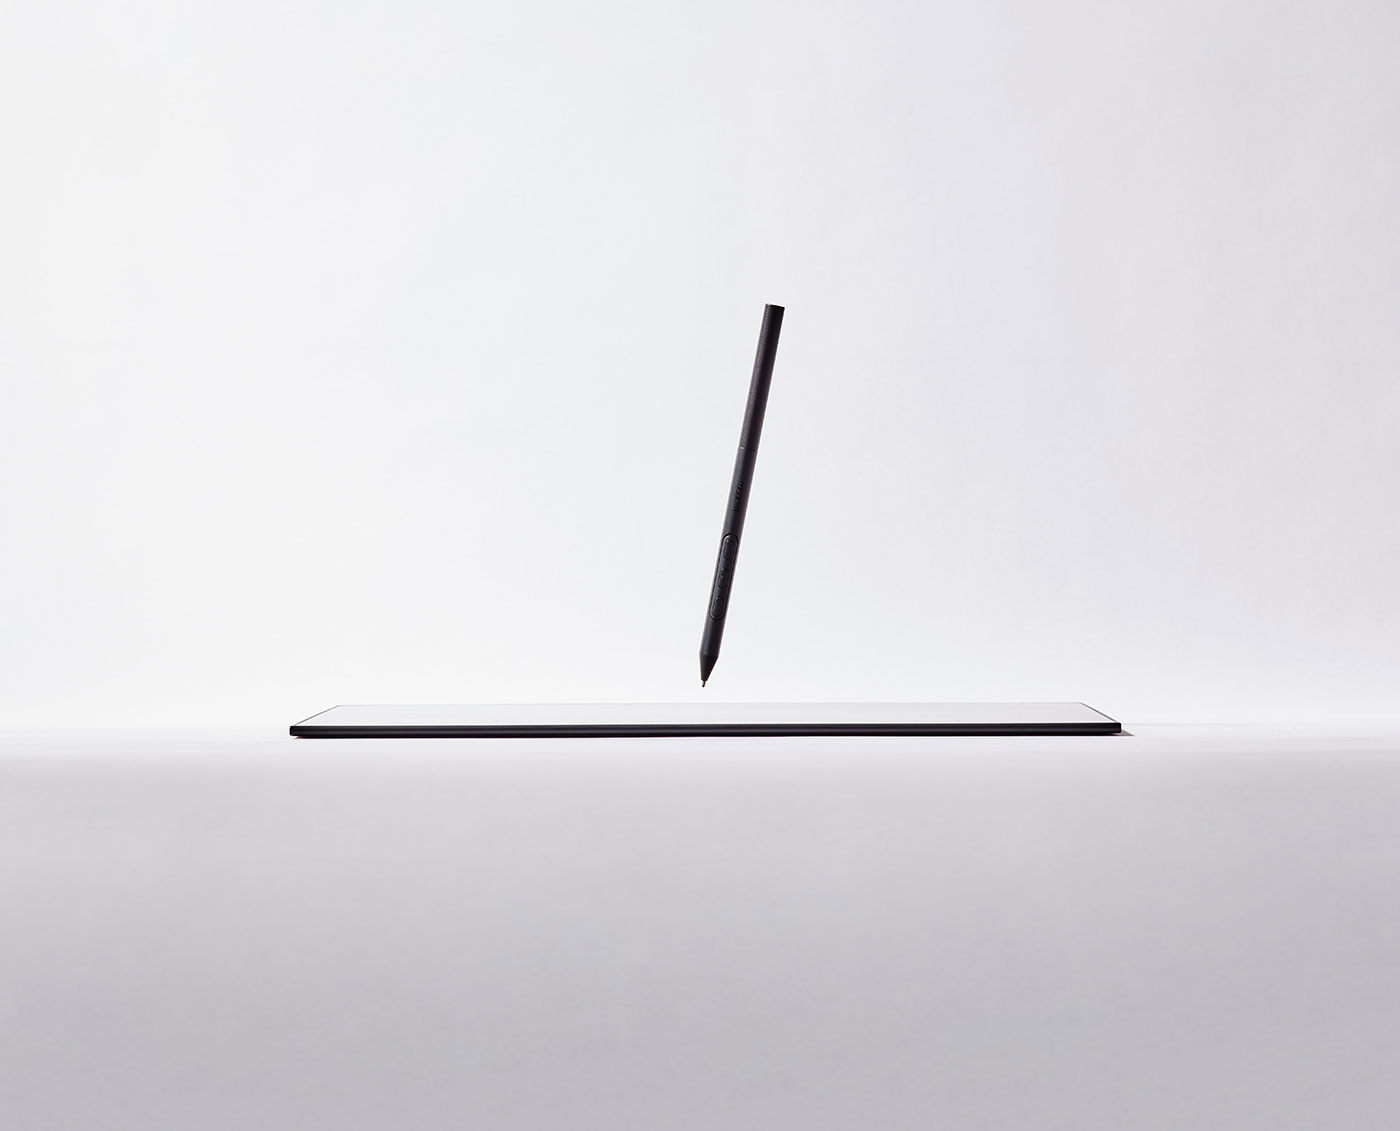 A sleek stylus elegantly rests upon a white tablet, ready for use